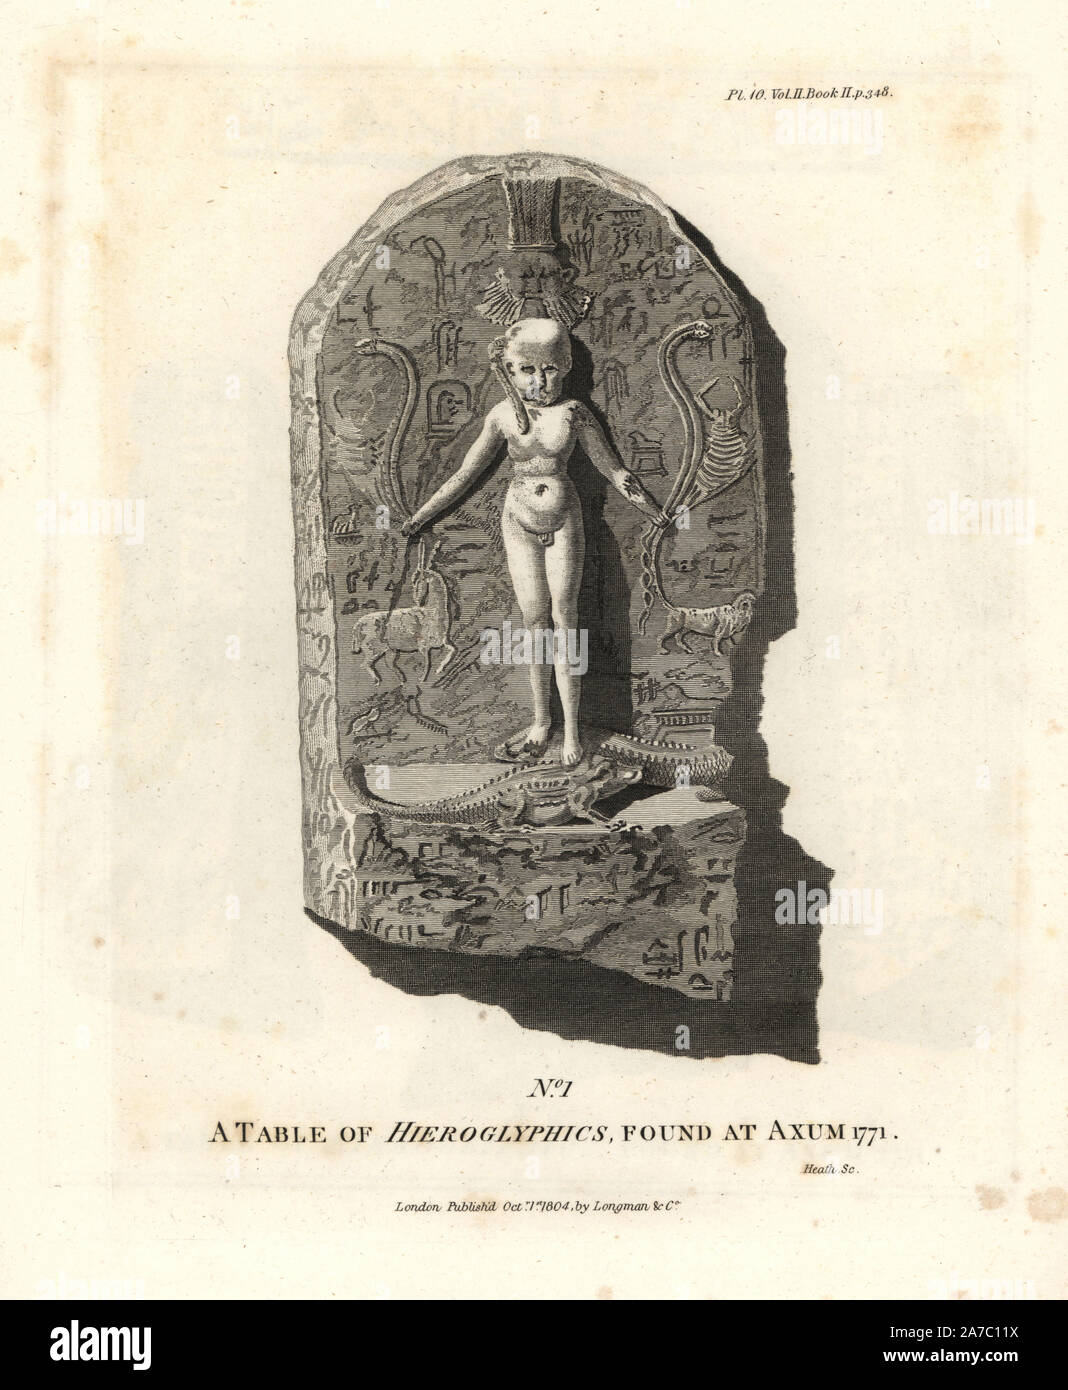 Table of hieroglyphics found at Axum. Copperplate engraving from James Bruce's 'Travels to Discover the Source of the Nile, in the years 1768, 1769, 1770, 1771, 1772 and 1773,' London, 1790. James Bruce (1730-1794) was a Scottish explorer and travel writer who spent more than 12 years in North Africa and Ethiopia. Engraved by Heath after an original drawing by Bruce. Stock Photo